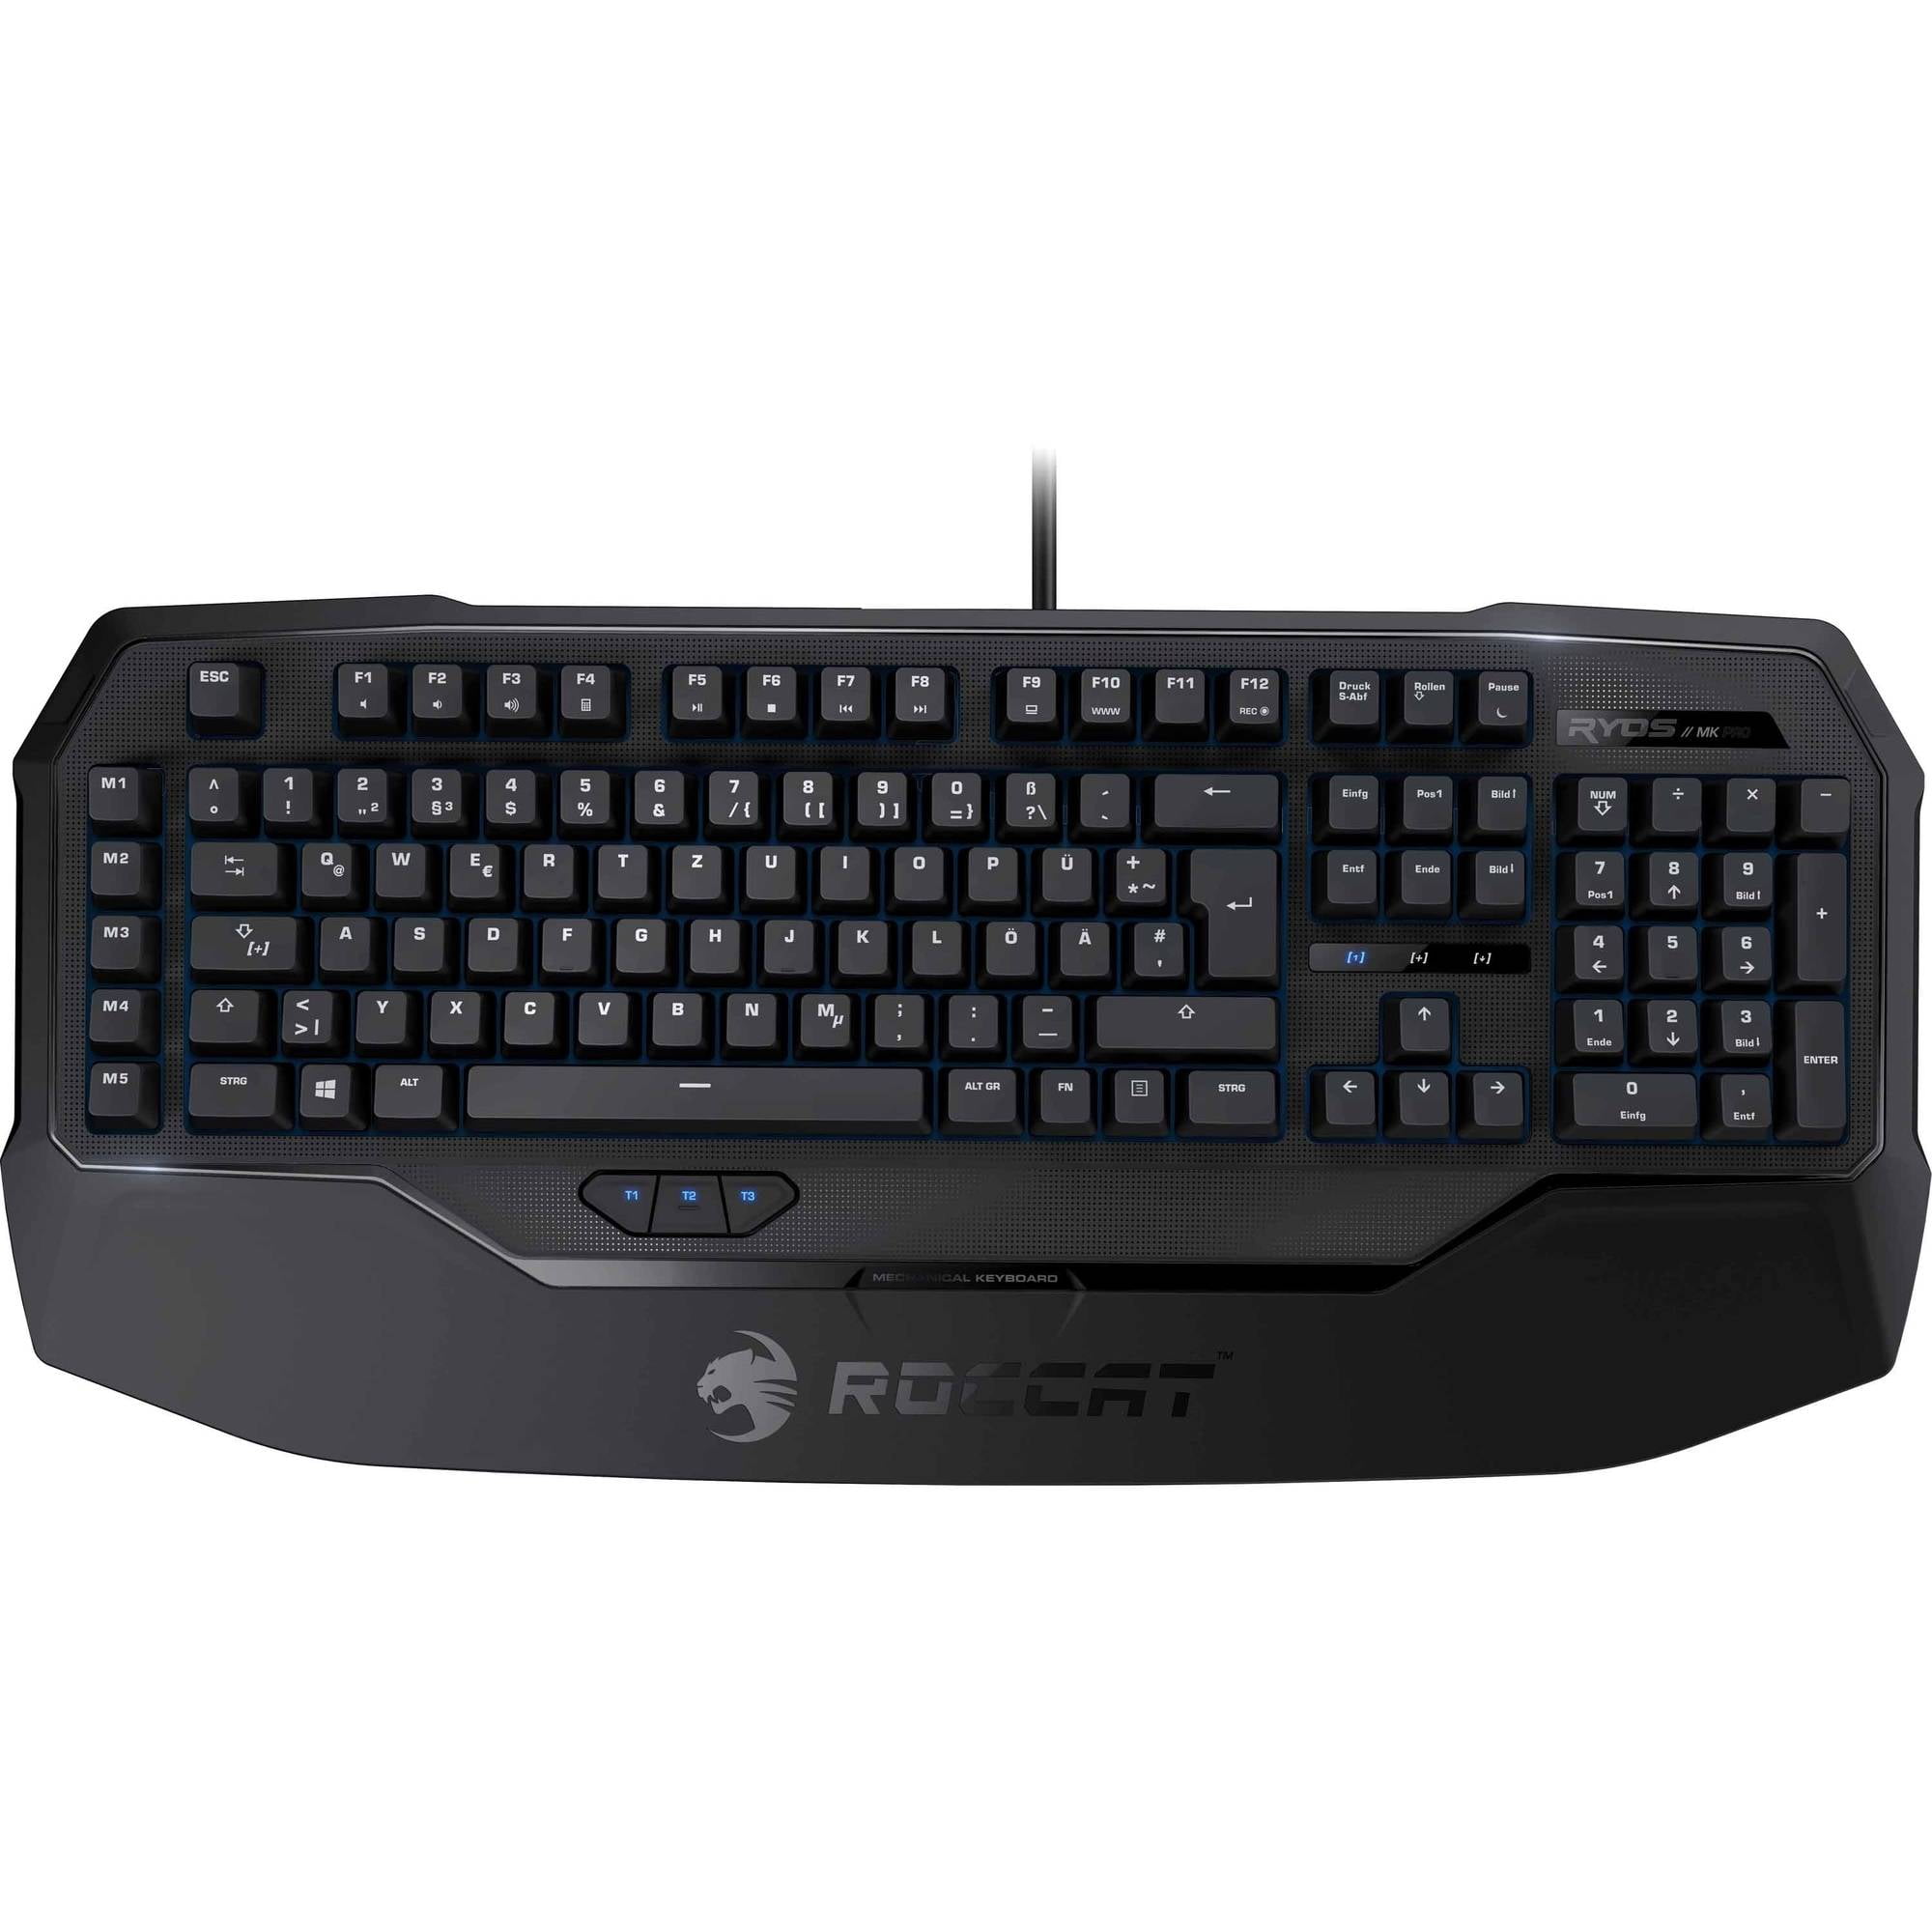 Ryos ROCCAT with Mechanical Switch MK Gaming Cherry Keyboard Advanced and Key MX